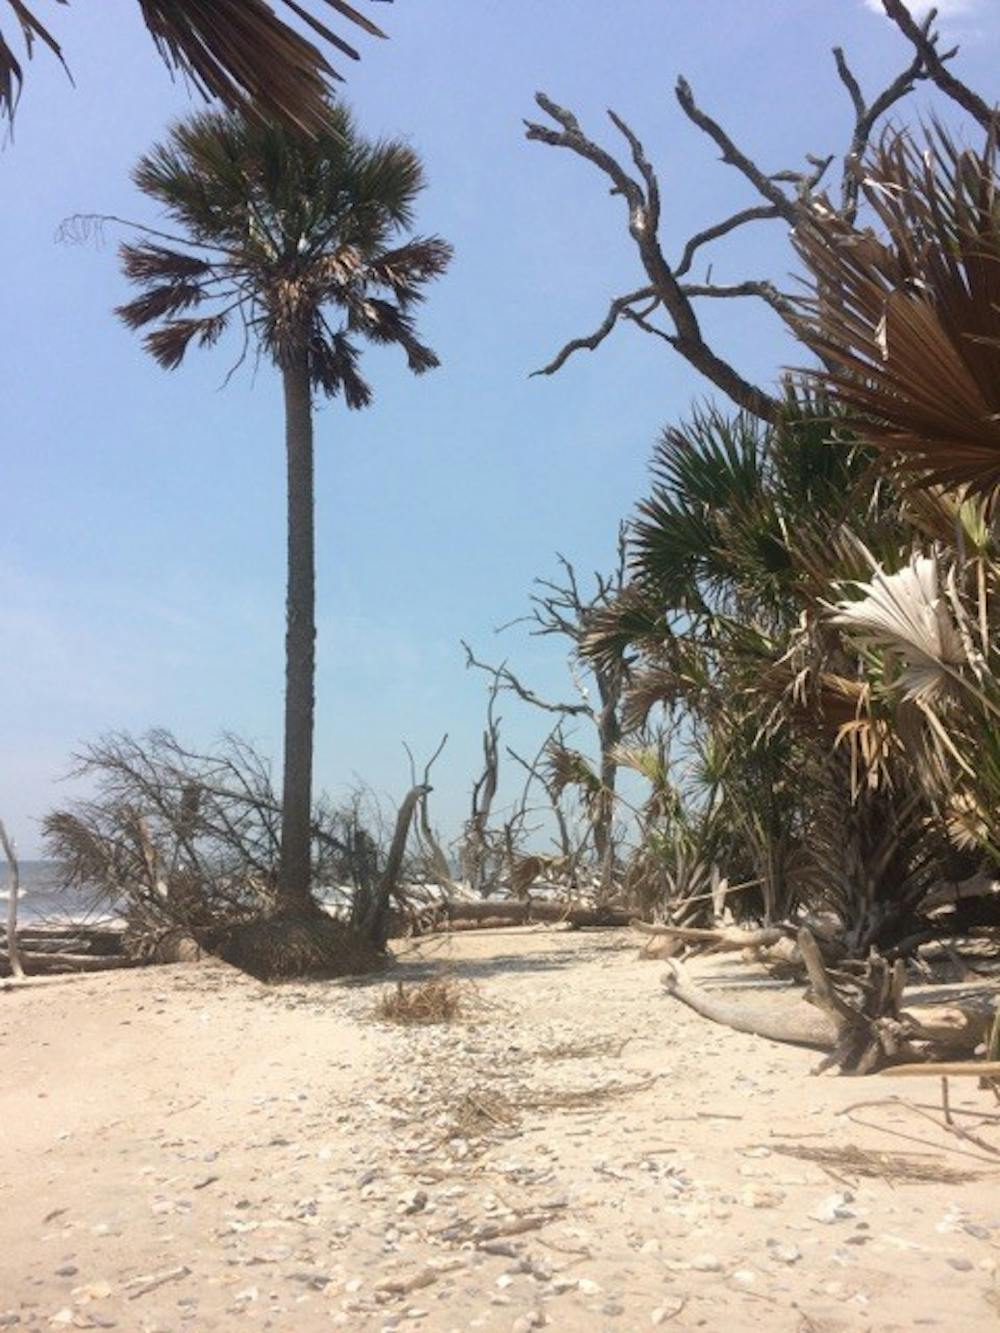 <p>The tree skeletons and palm trees at Botany Bay provide an excellent photo opportunity and are scenic additions to a quiet afternoon spent at Botany Bay.</p>